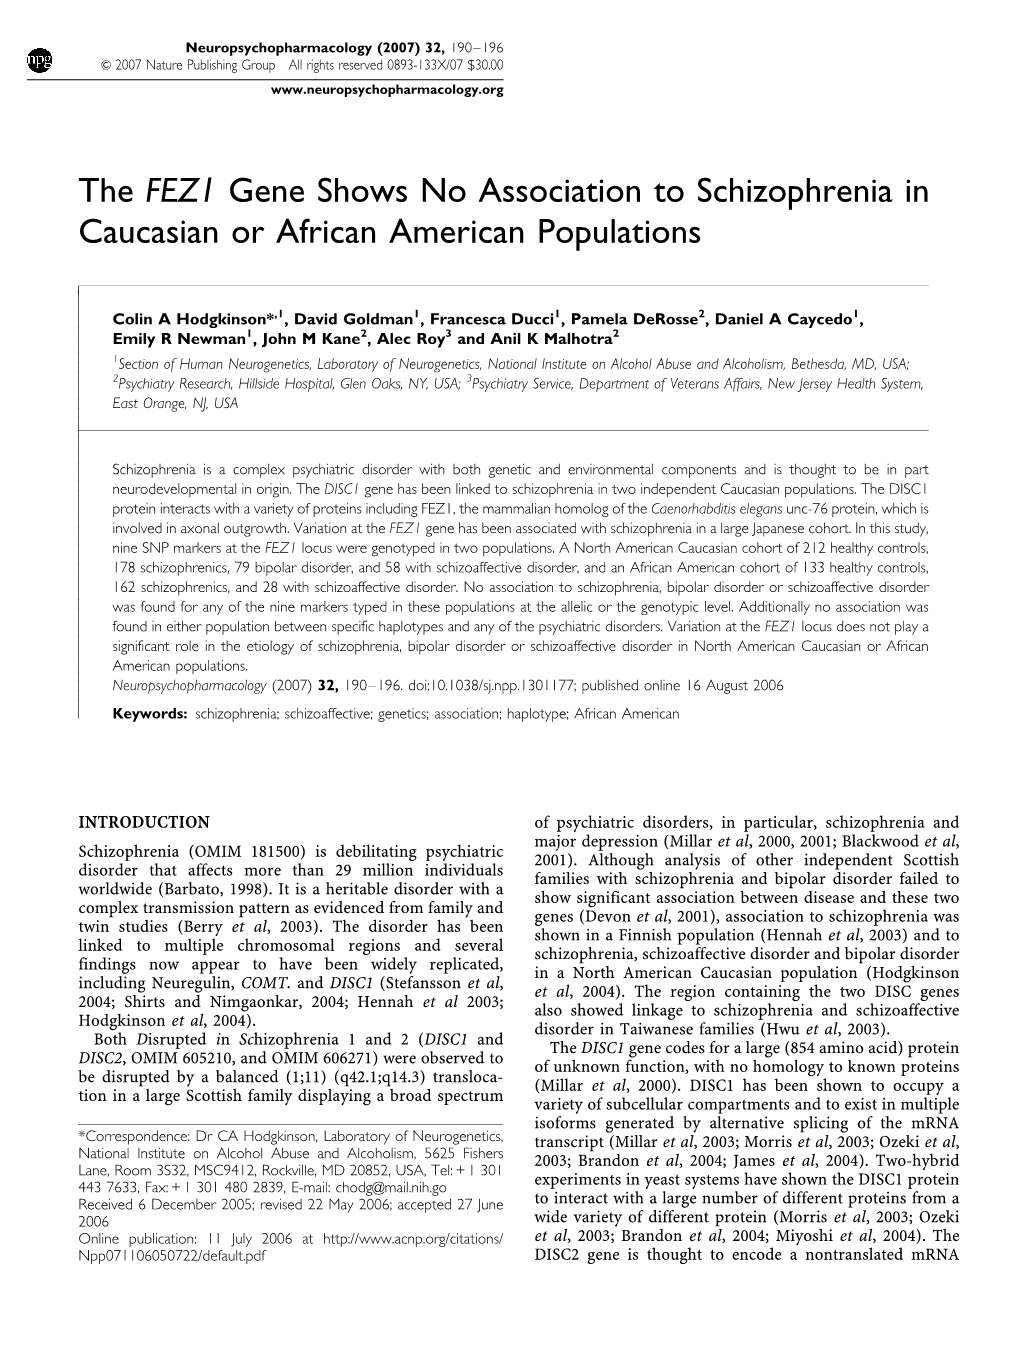 The FEZ1 Gene Shows No Association to Schizophrenia in Caucasian Or African American Populations